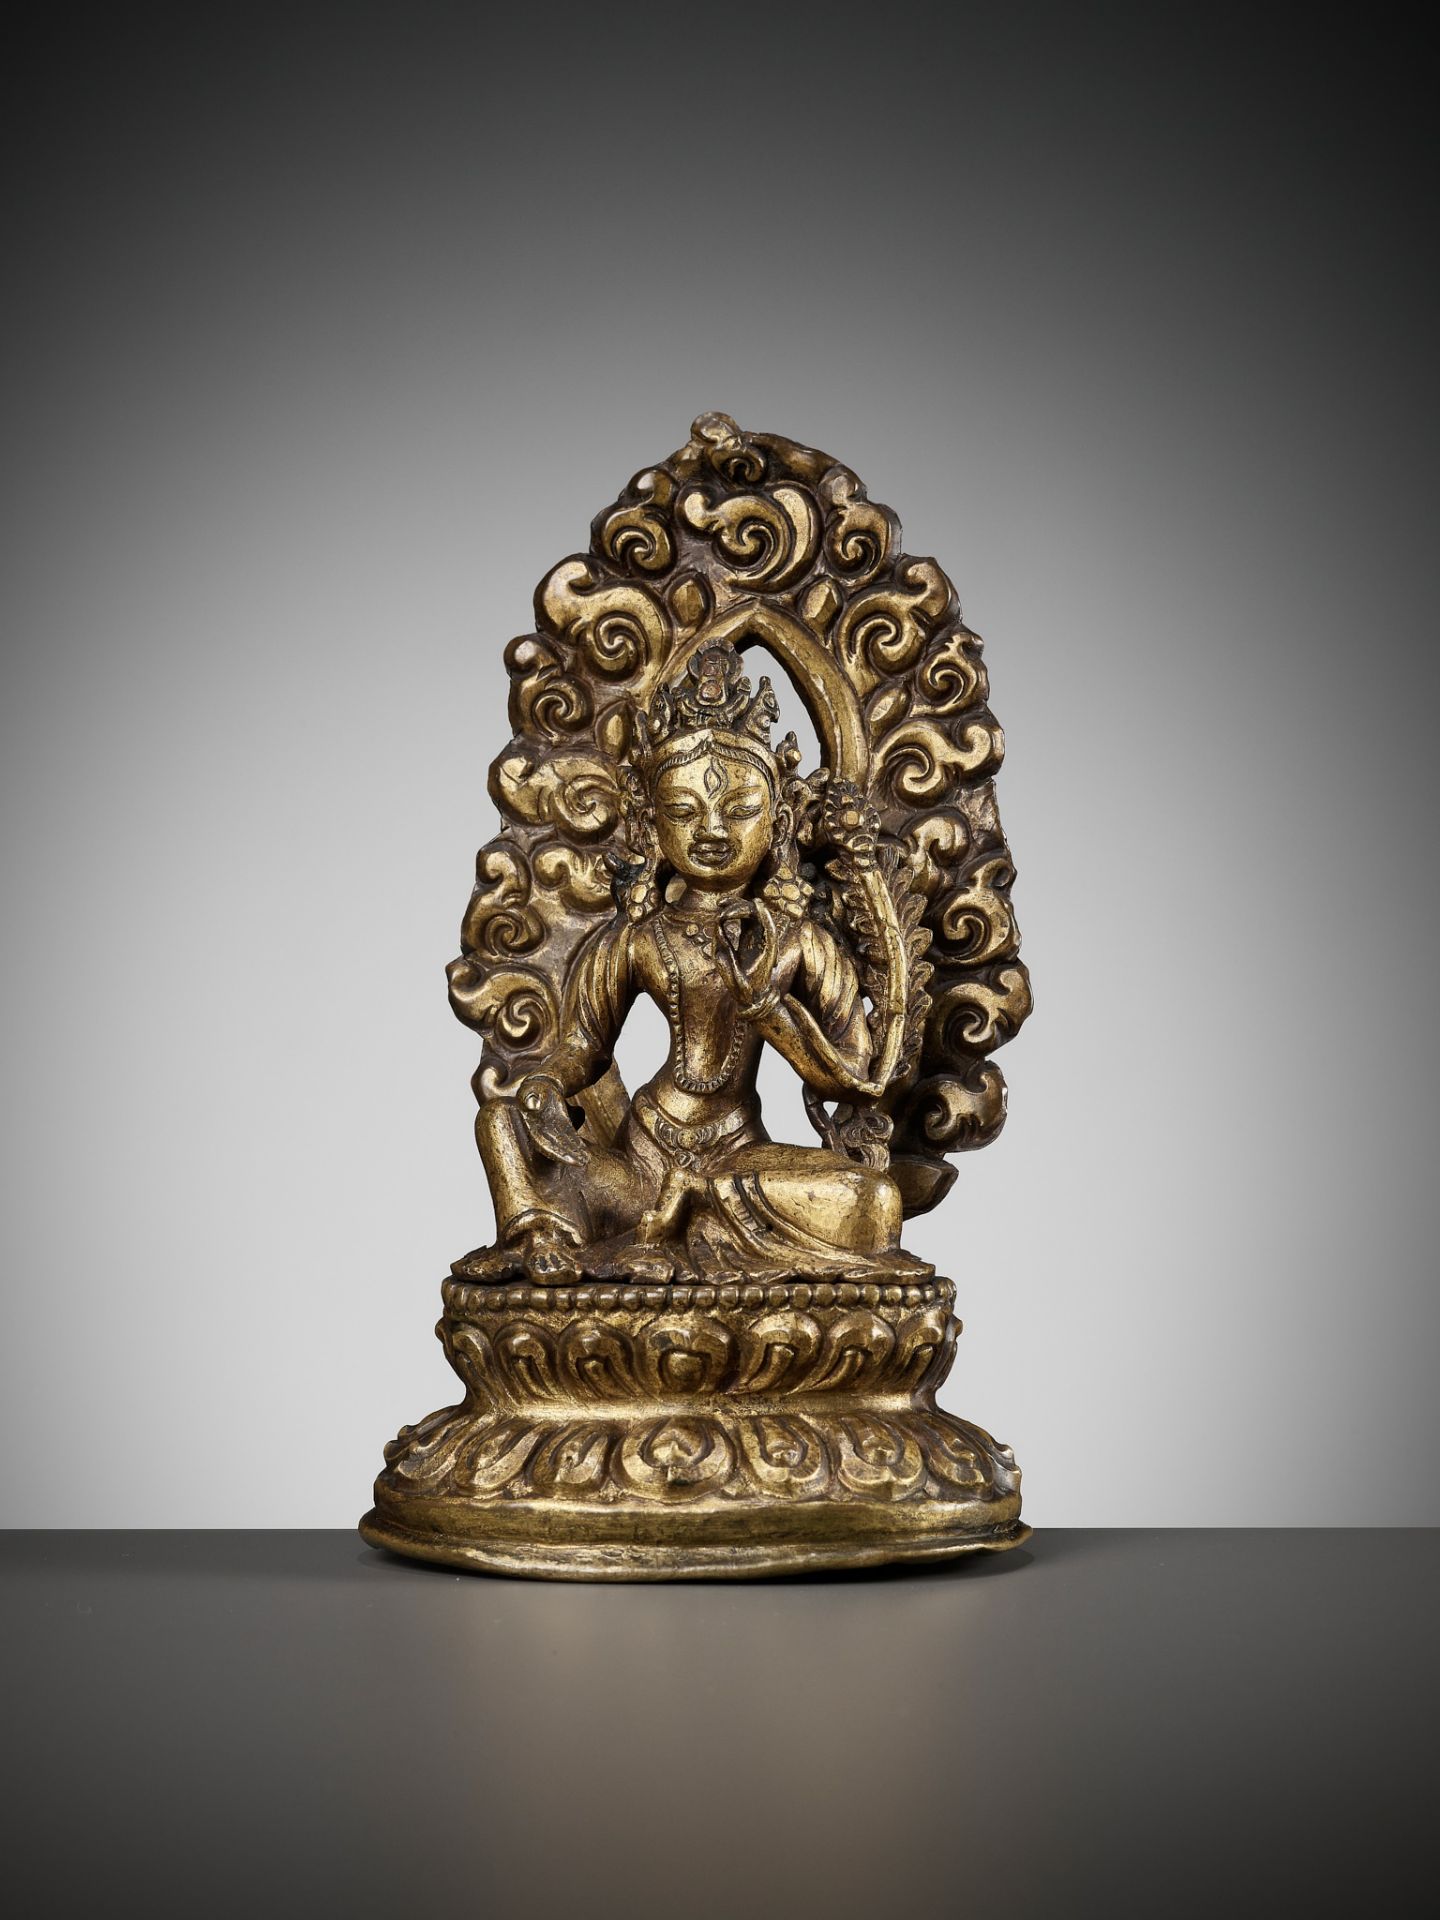 A GILT COPPER REPOUSSE FIGURE OF TARA, NEPAL, 18TH-19TH CENTURY - Image 13 of 15